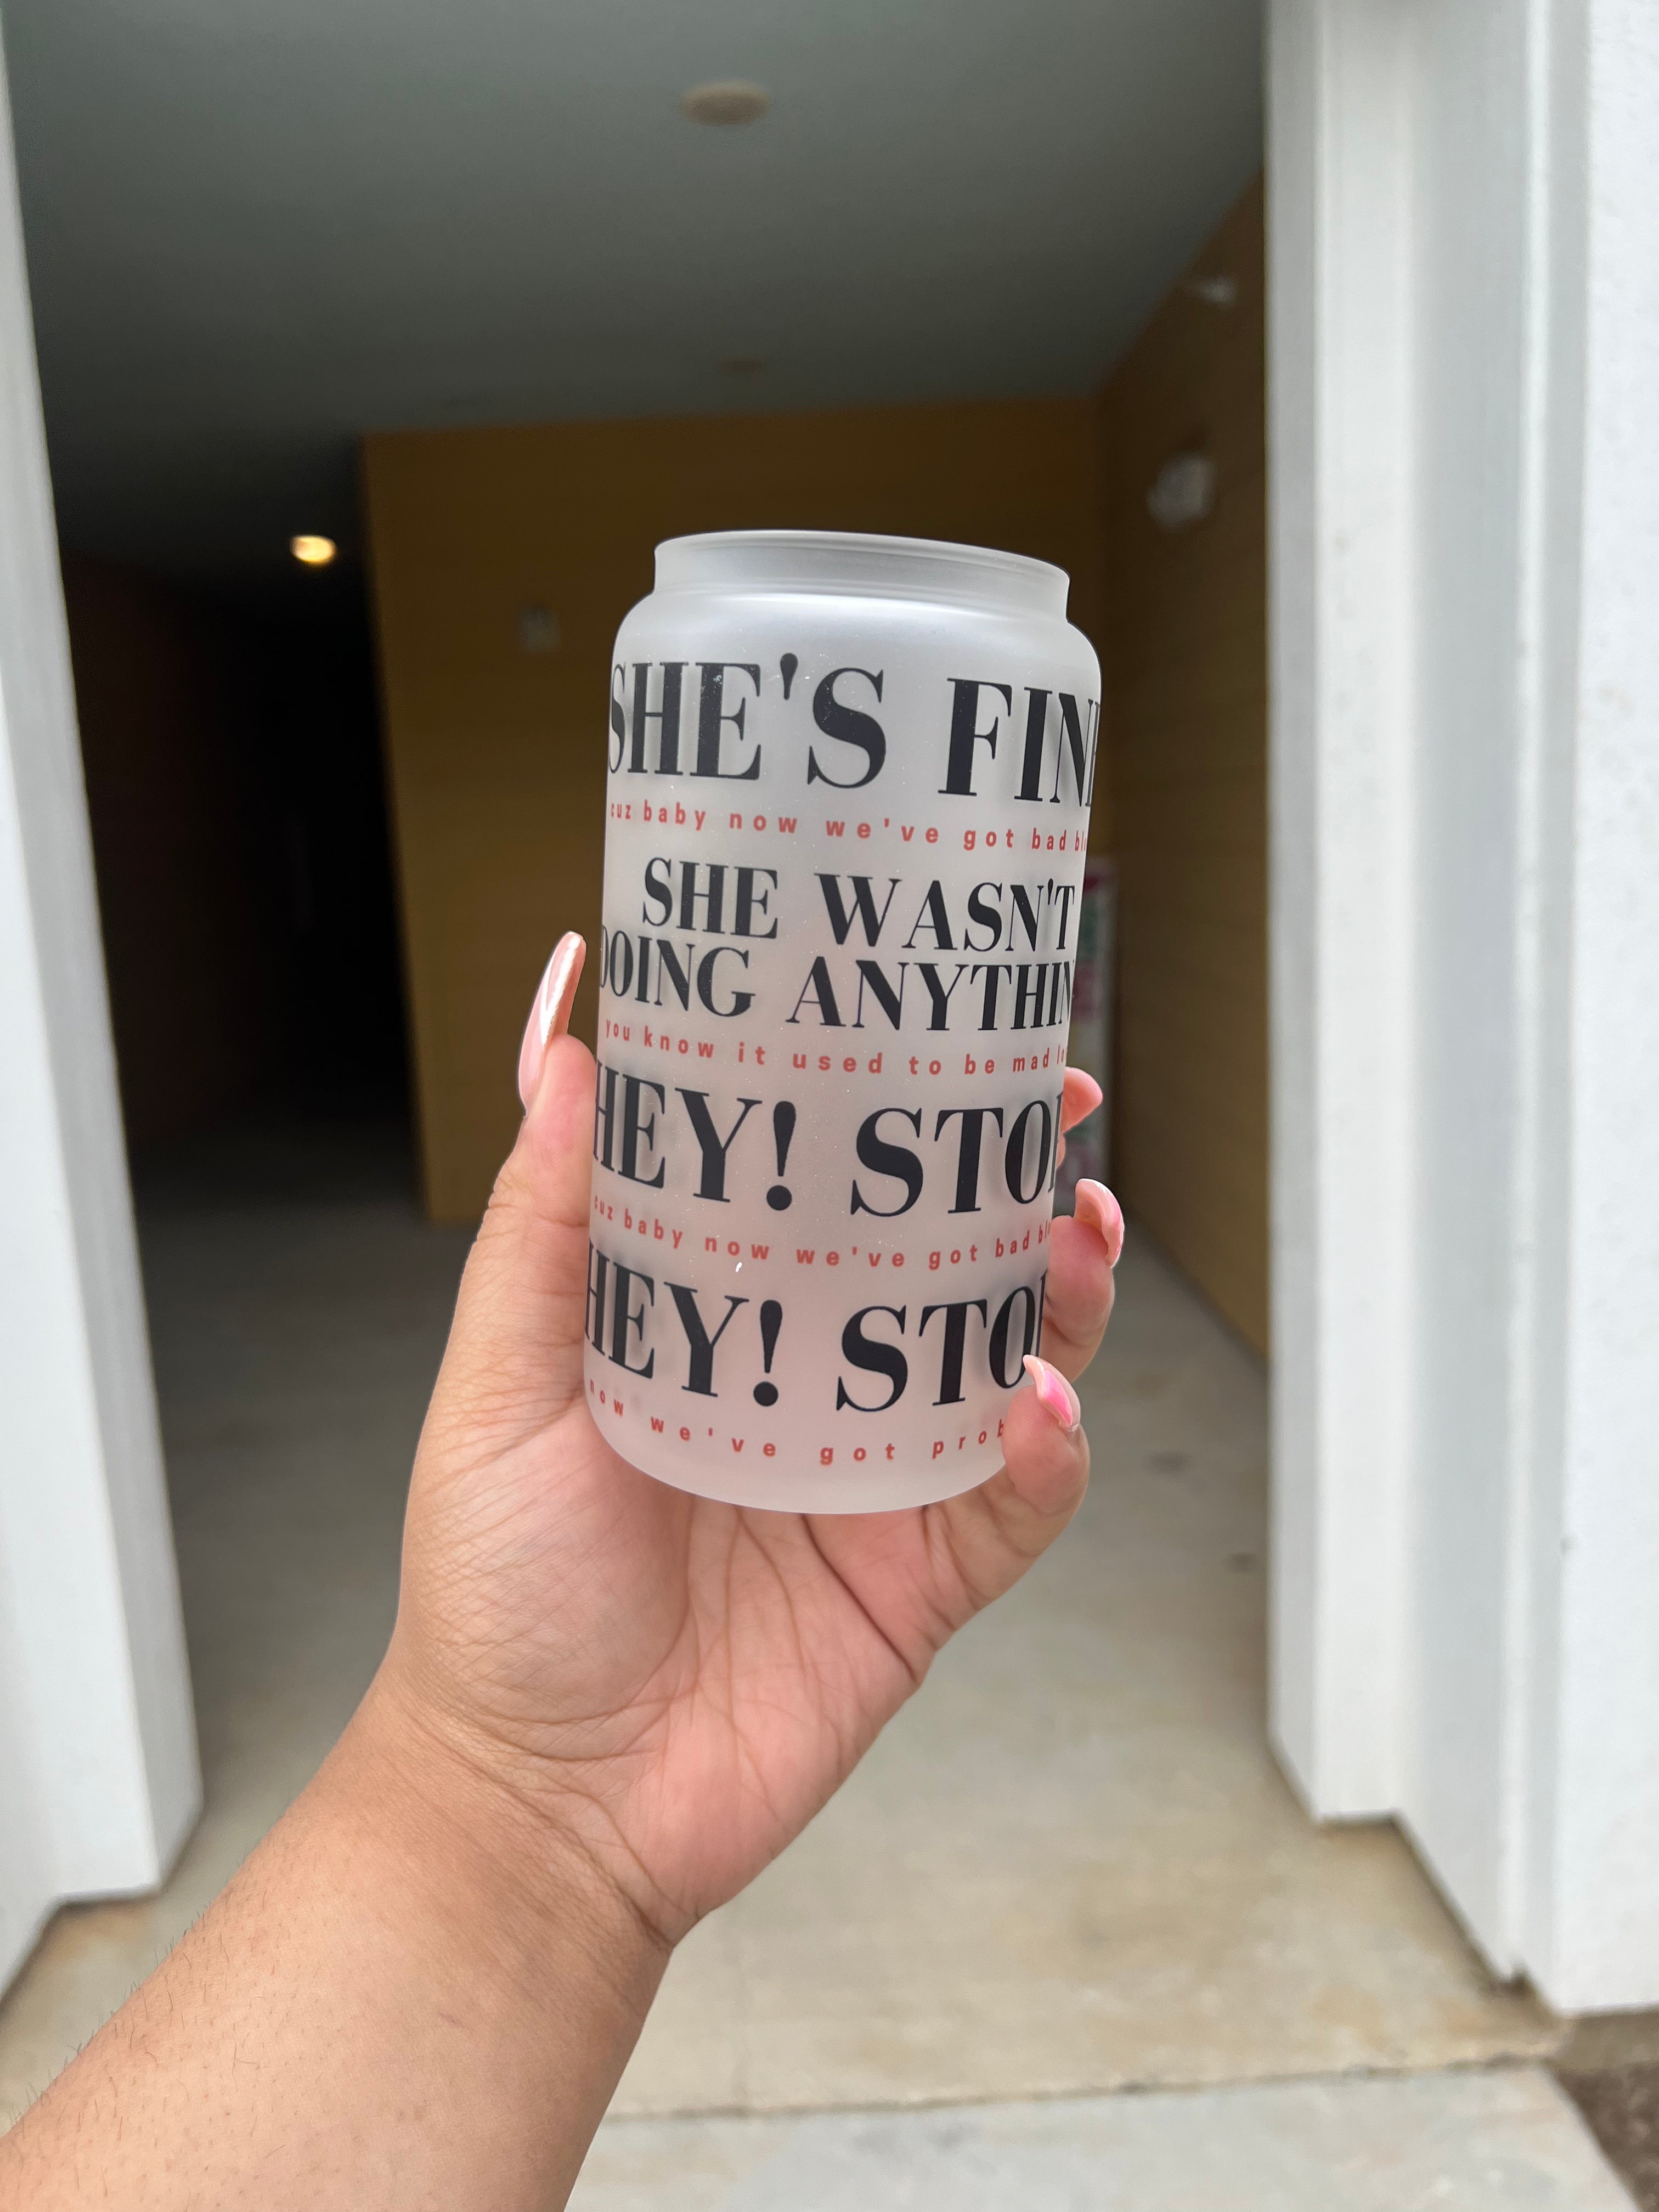 HEY! STOP! (Taylor’s Version) cup [LIMITED EDITION]